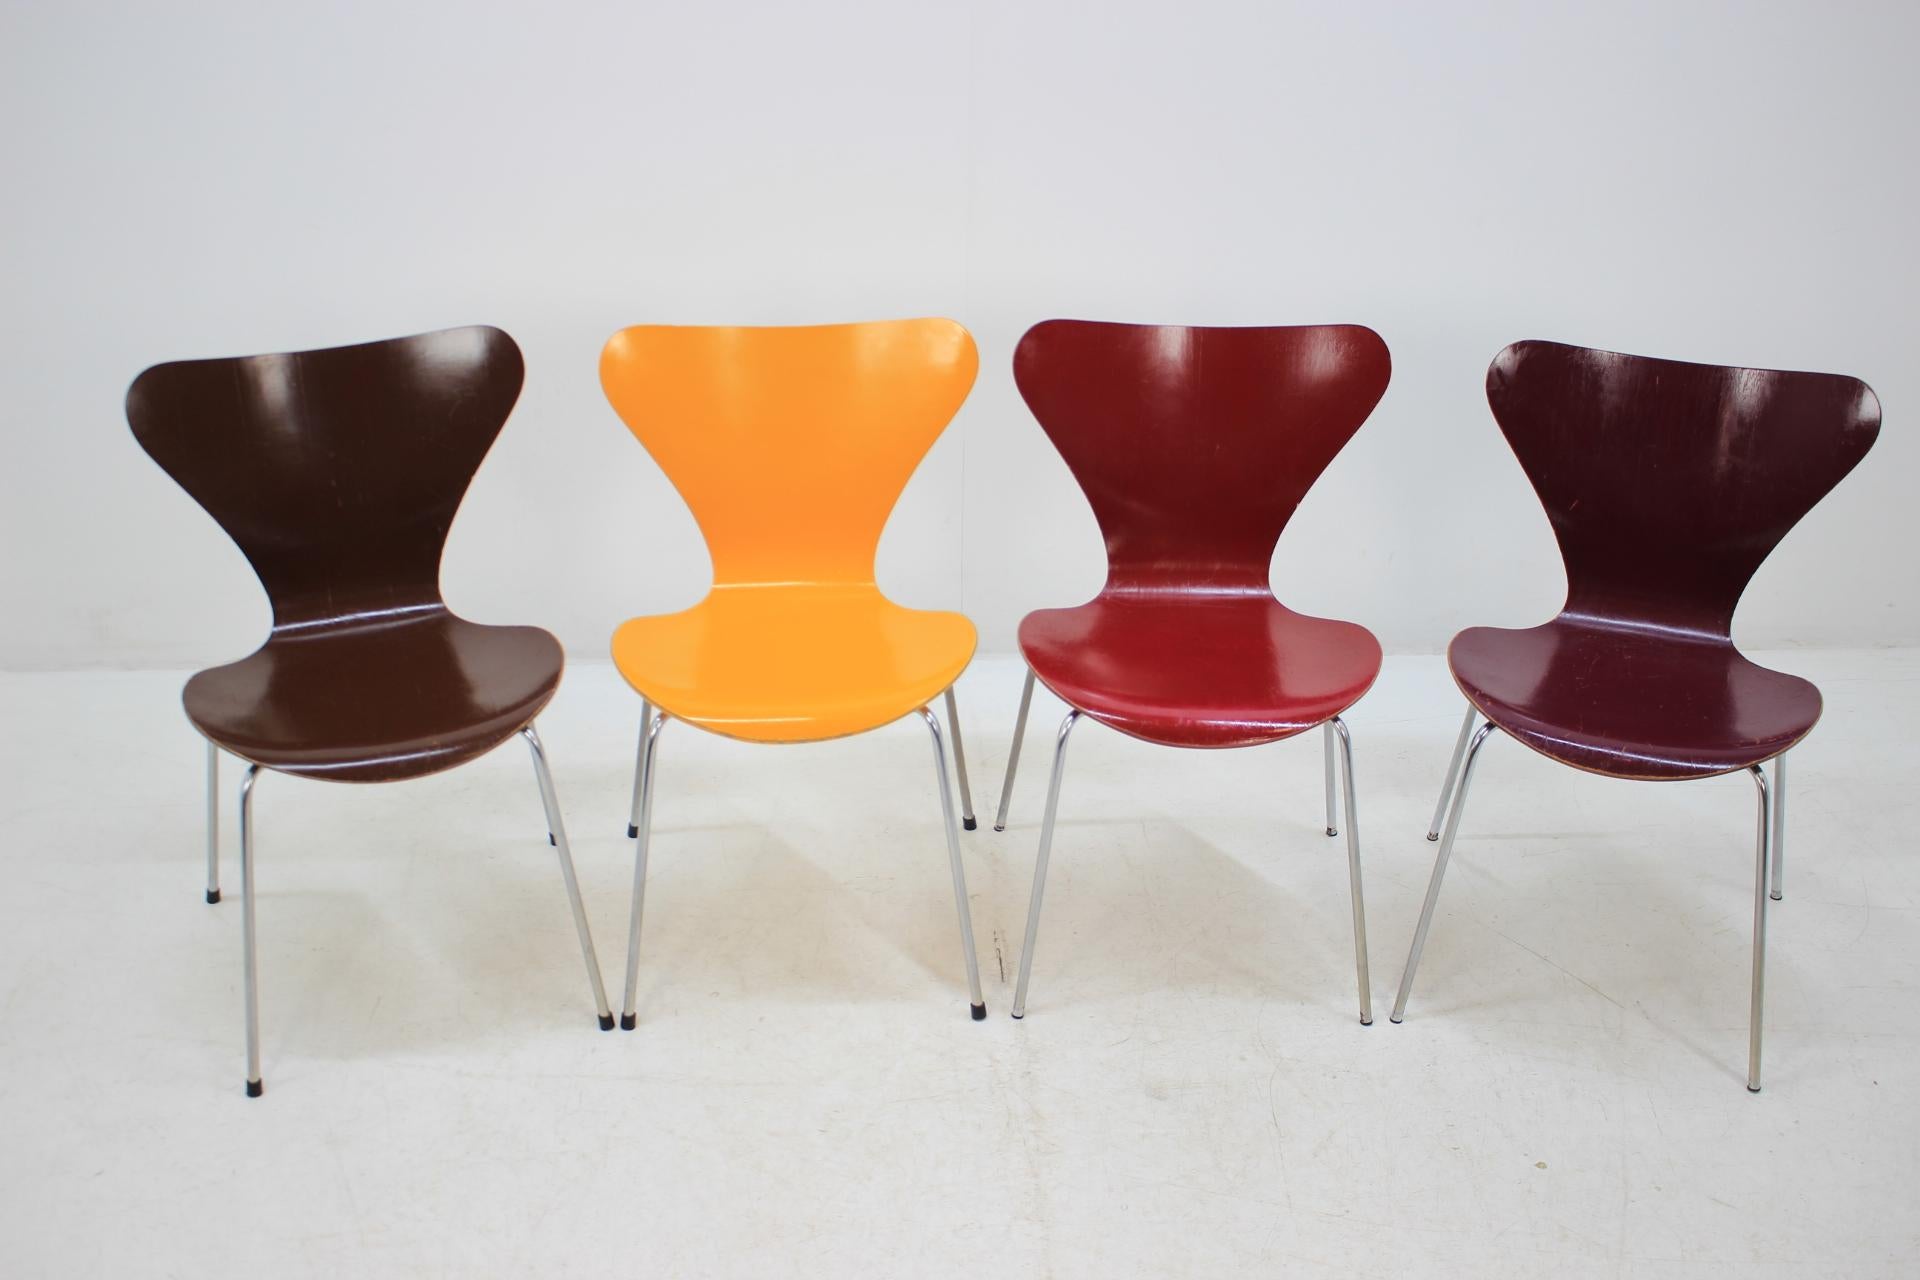 Late 20th Century Set of Four Midcentury Iconic Chairs Arne Jacobsen for Fritz Hansen, Series 7